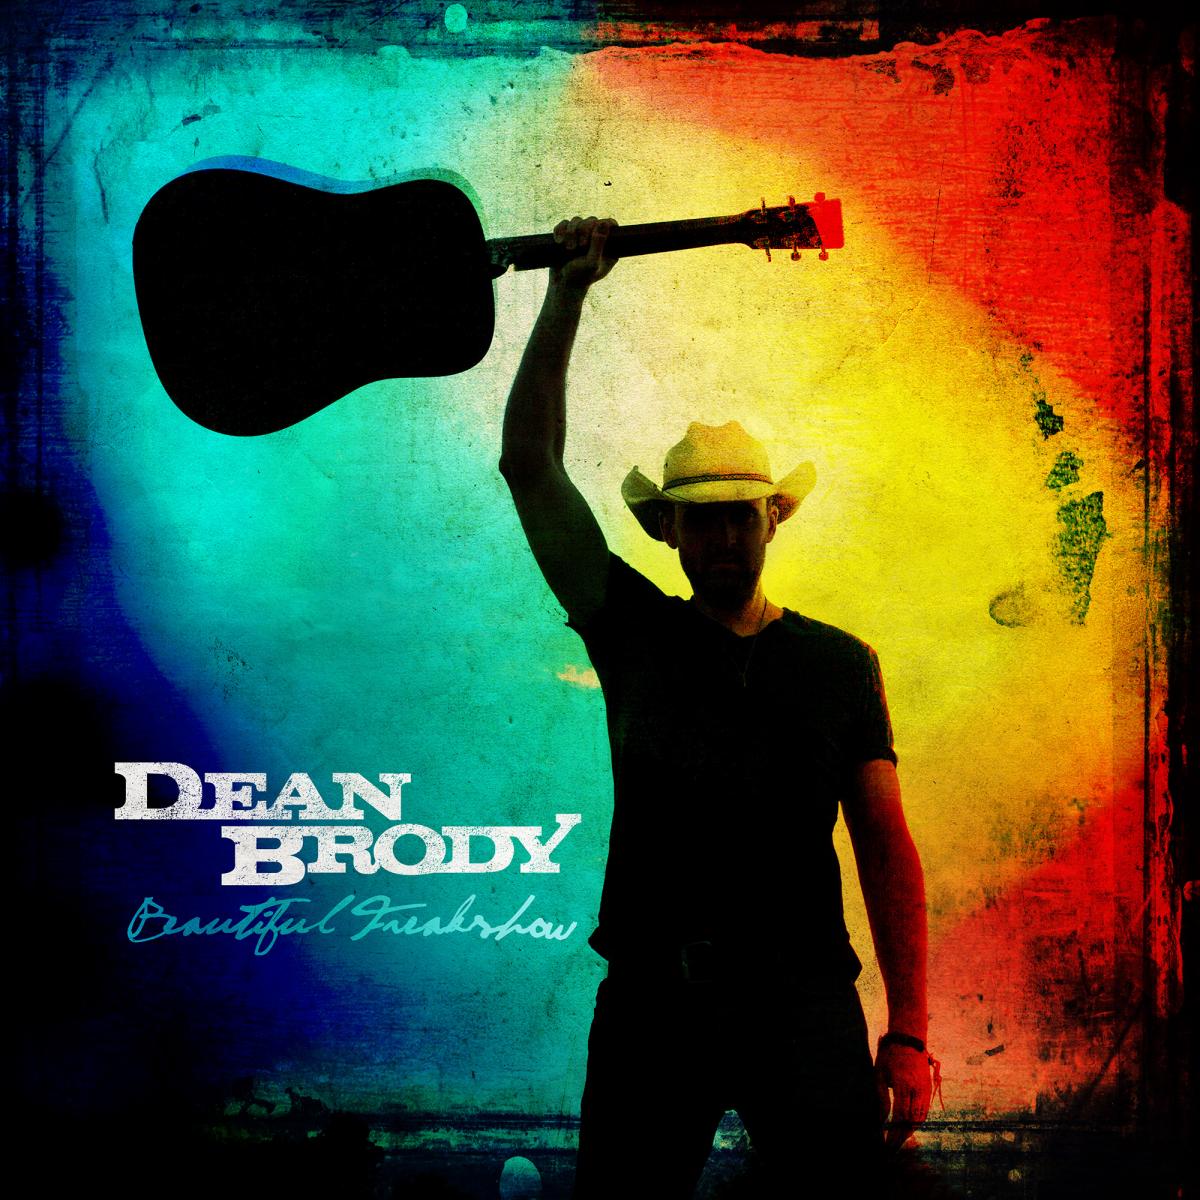 Dean Brody Releases Progressive New Single "Beautiful Freakshow" Ahead of Cross Country Arena Tour